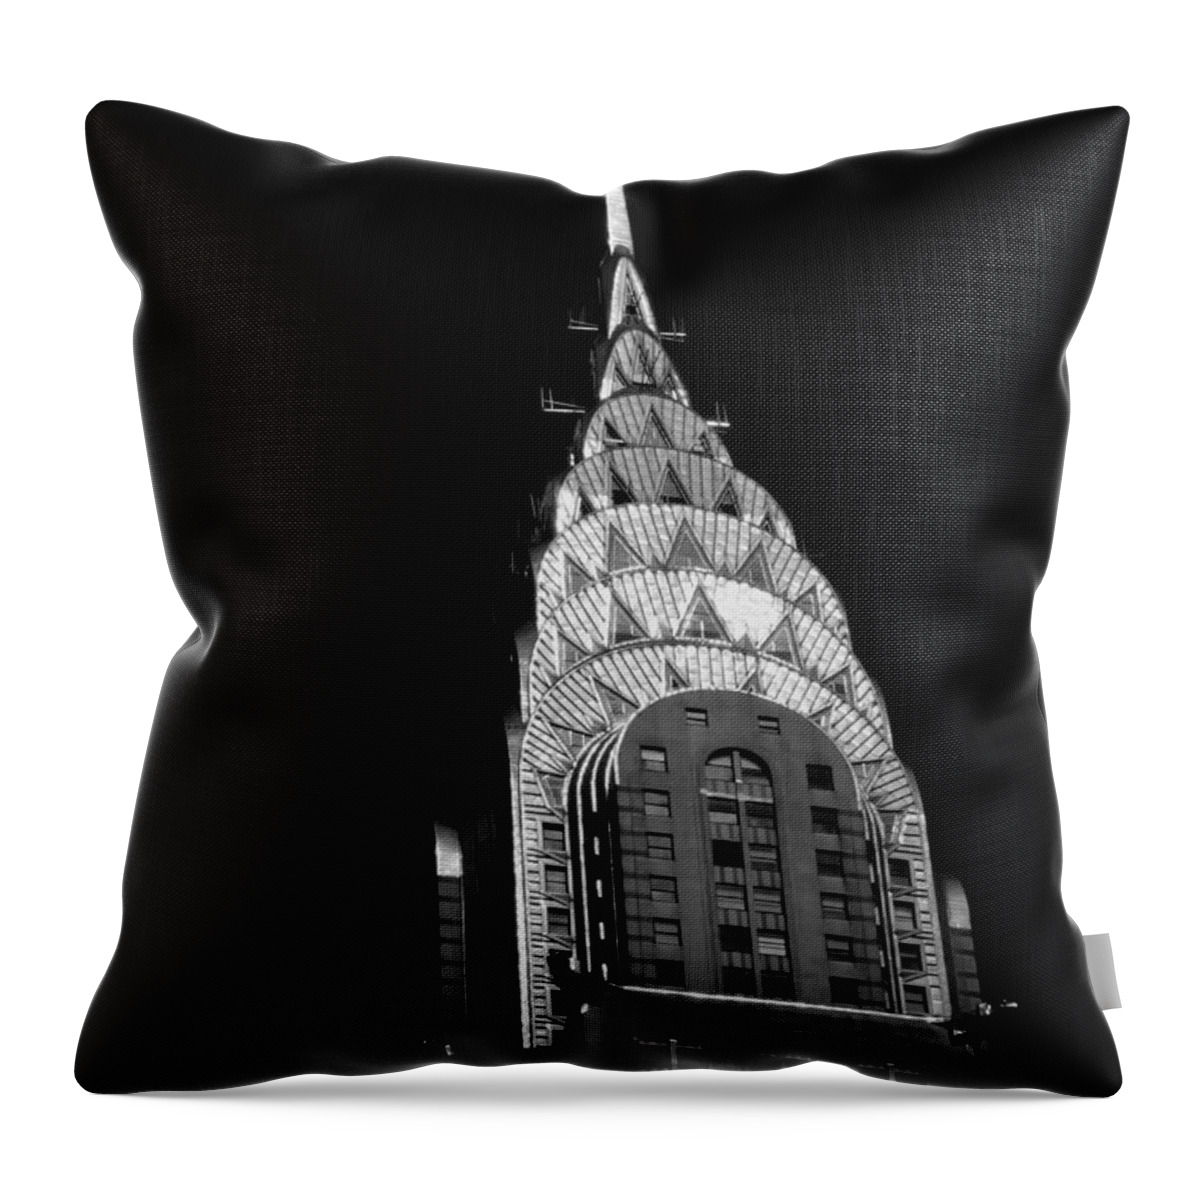 Chrysler Building Throw Pillow featuring the photograph The Chrysler Building by Vivienne Gucwa